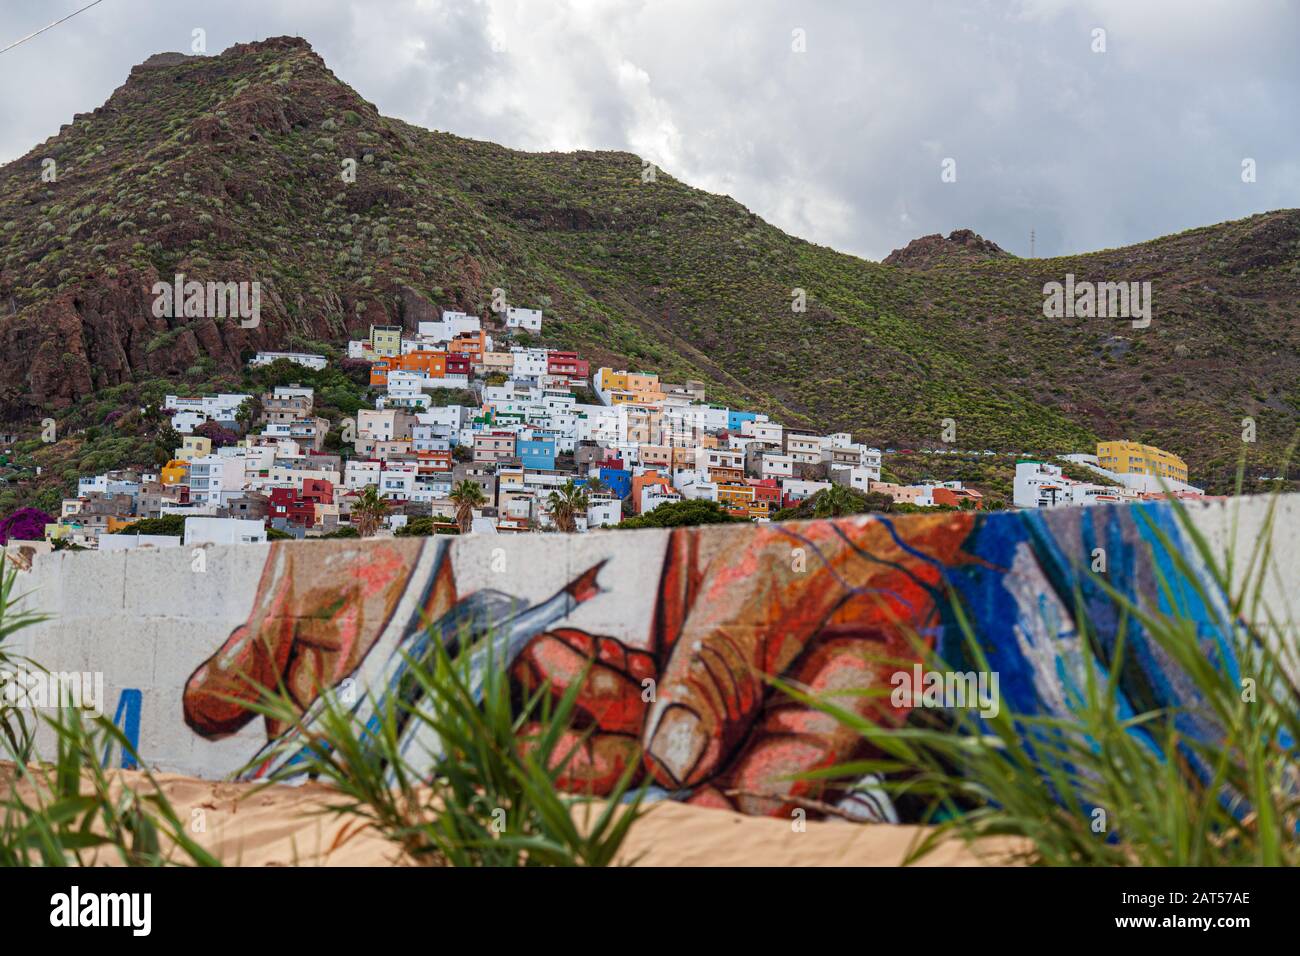 San Andrés is a village located on the island of Tenerife in the Canary Islands. It is located on the coast, at the foot of the Anaga mountains Stock Photo